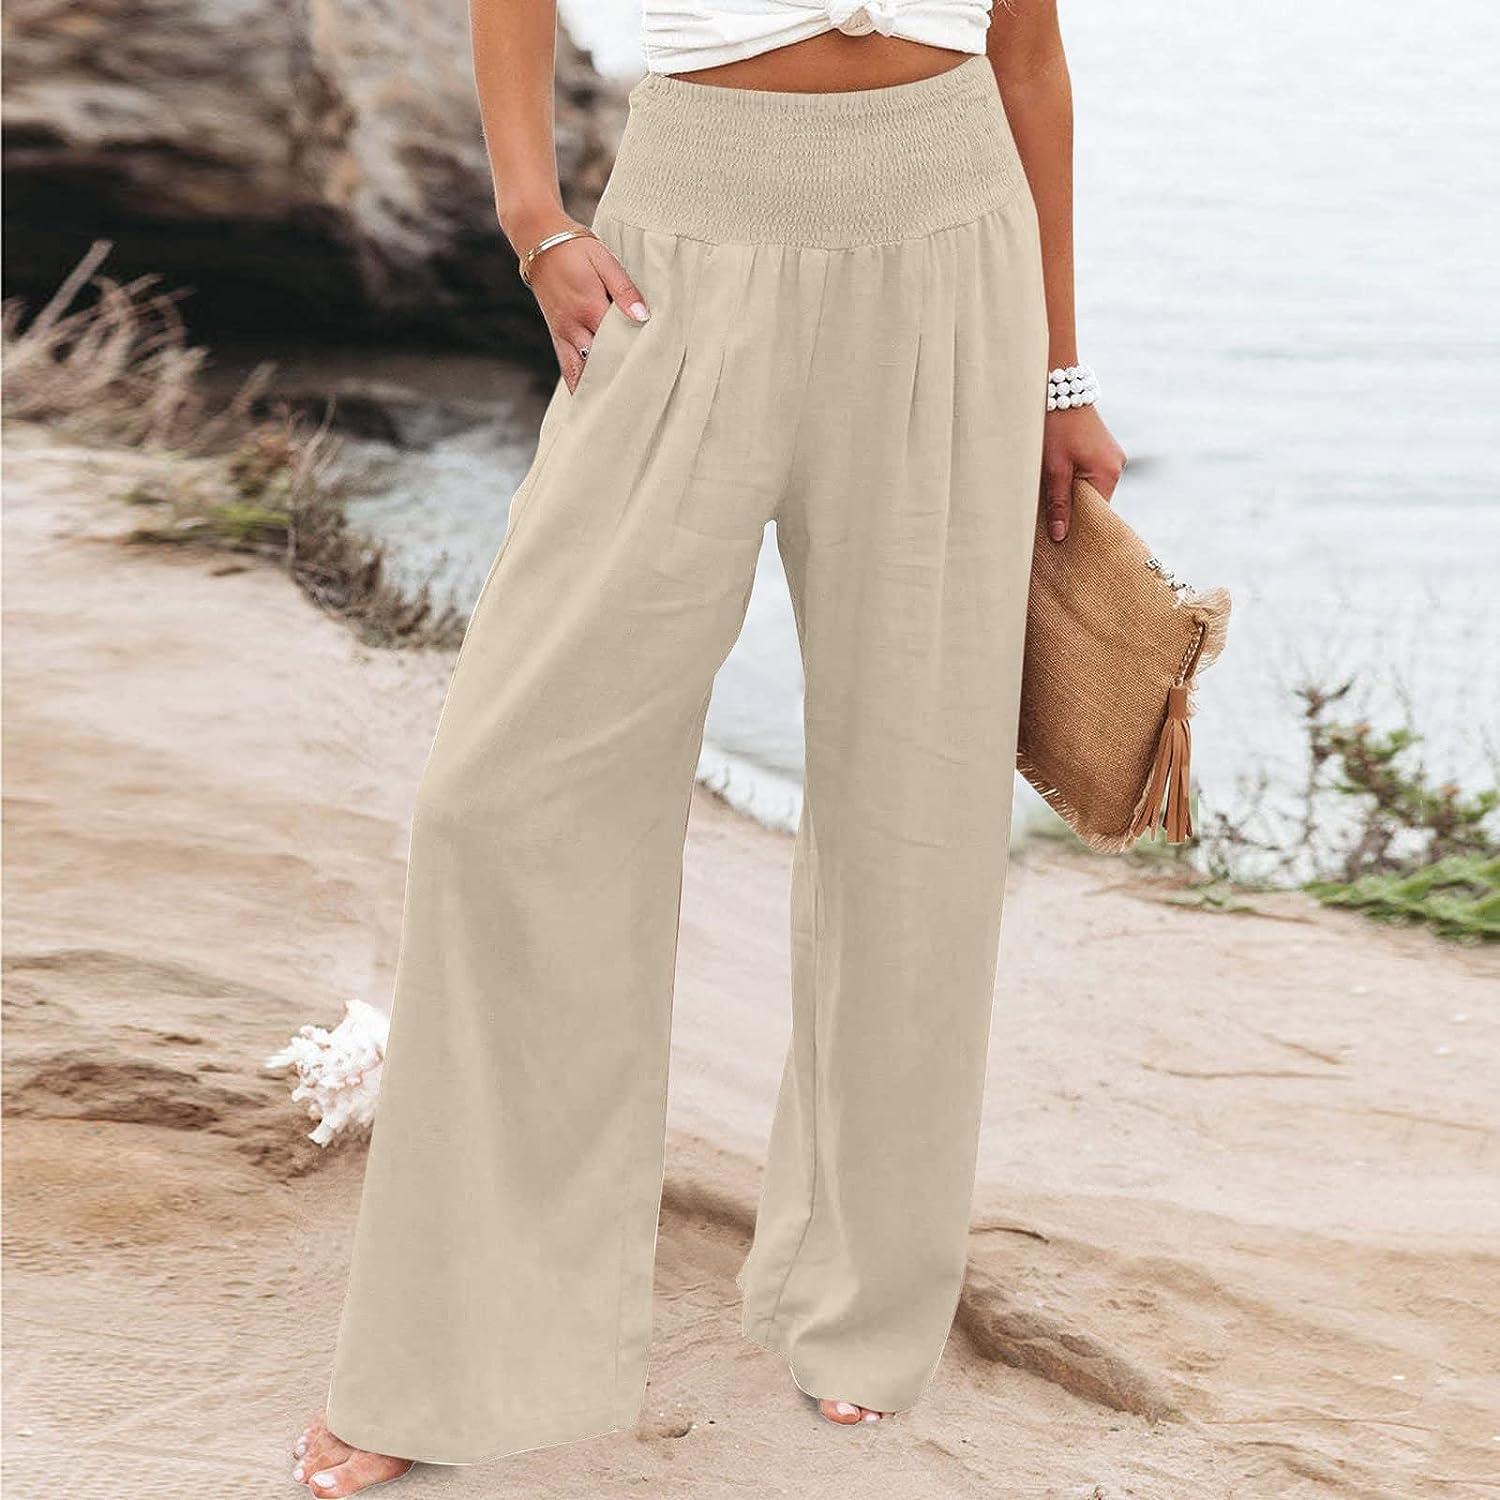 ZQGJB Womens Cotton Linen Wide Leg Pants Summer Casual Solid Color High  Waisted Palazzo Pants Baggy Lounge Beach Trousers with Pocket Khaki XL